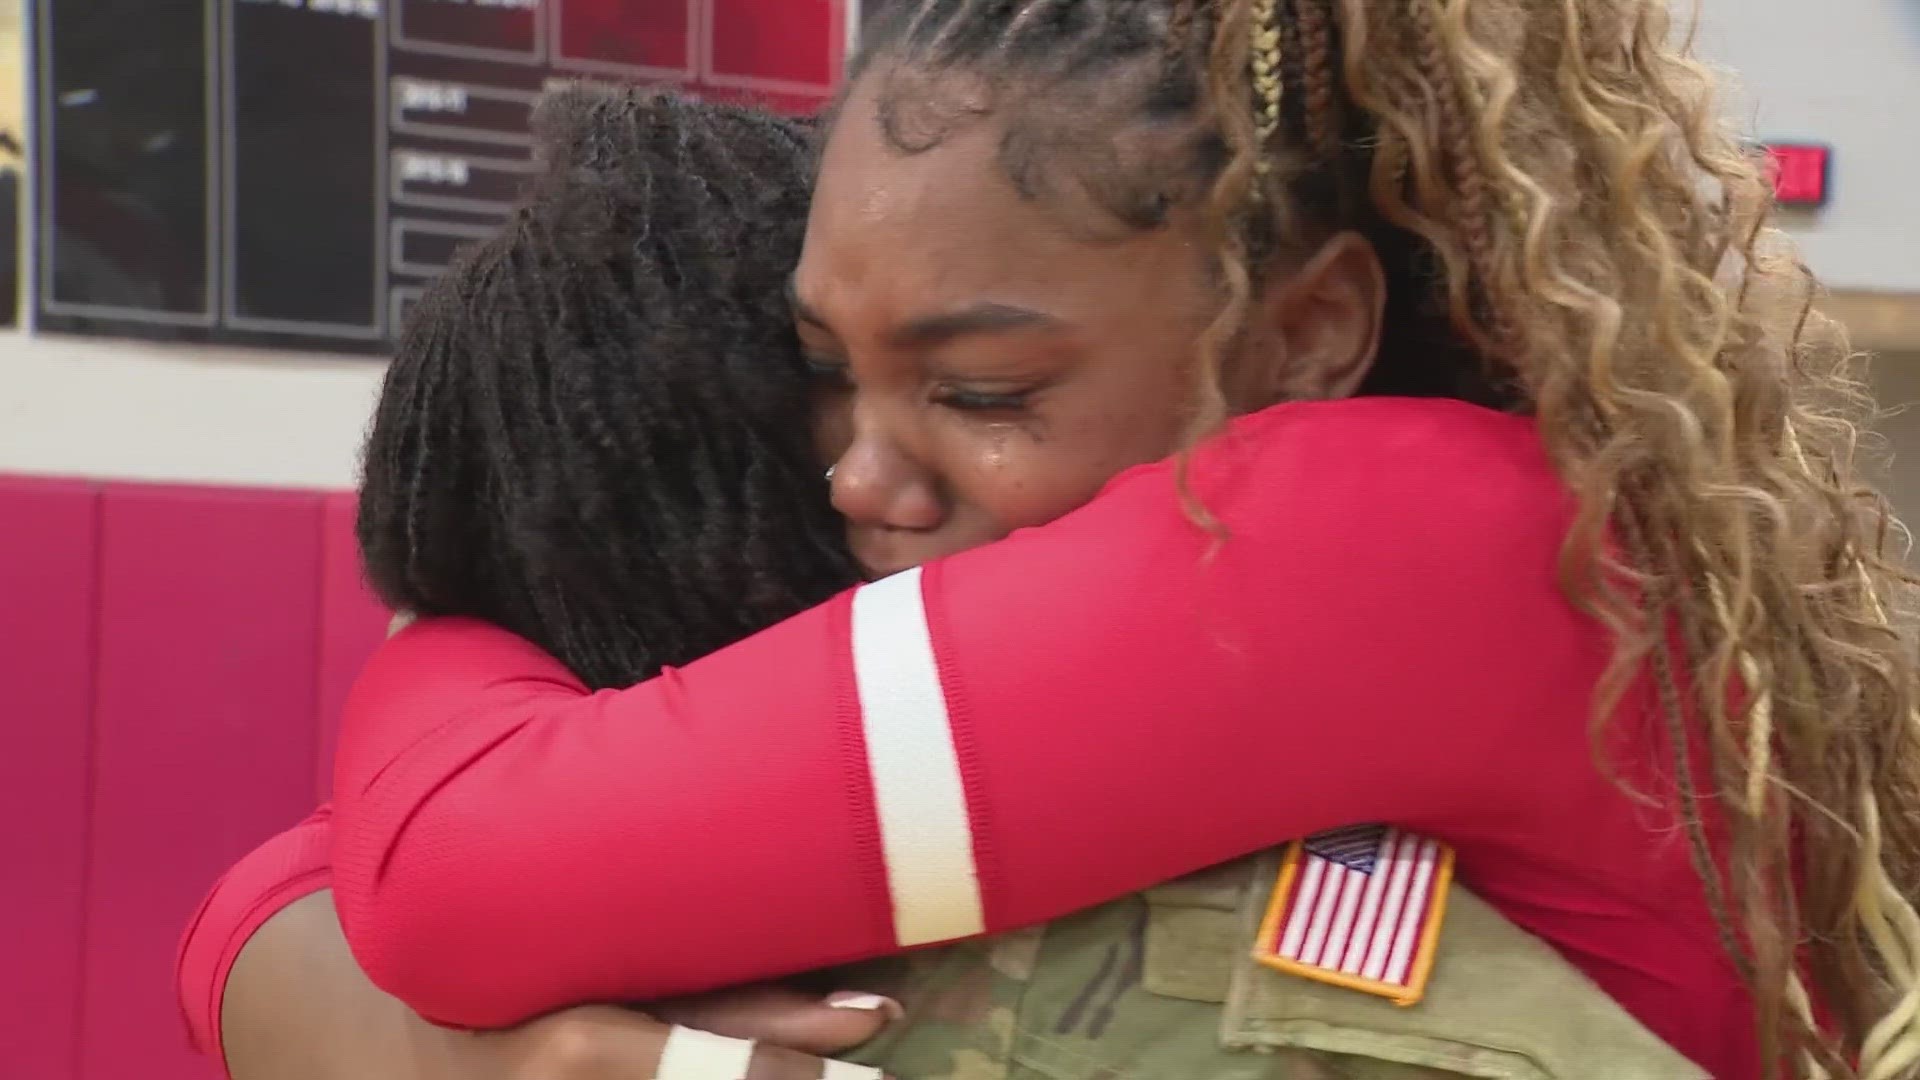 For the military mom, she didn't want to miss another one of her kids' practices or games.